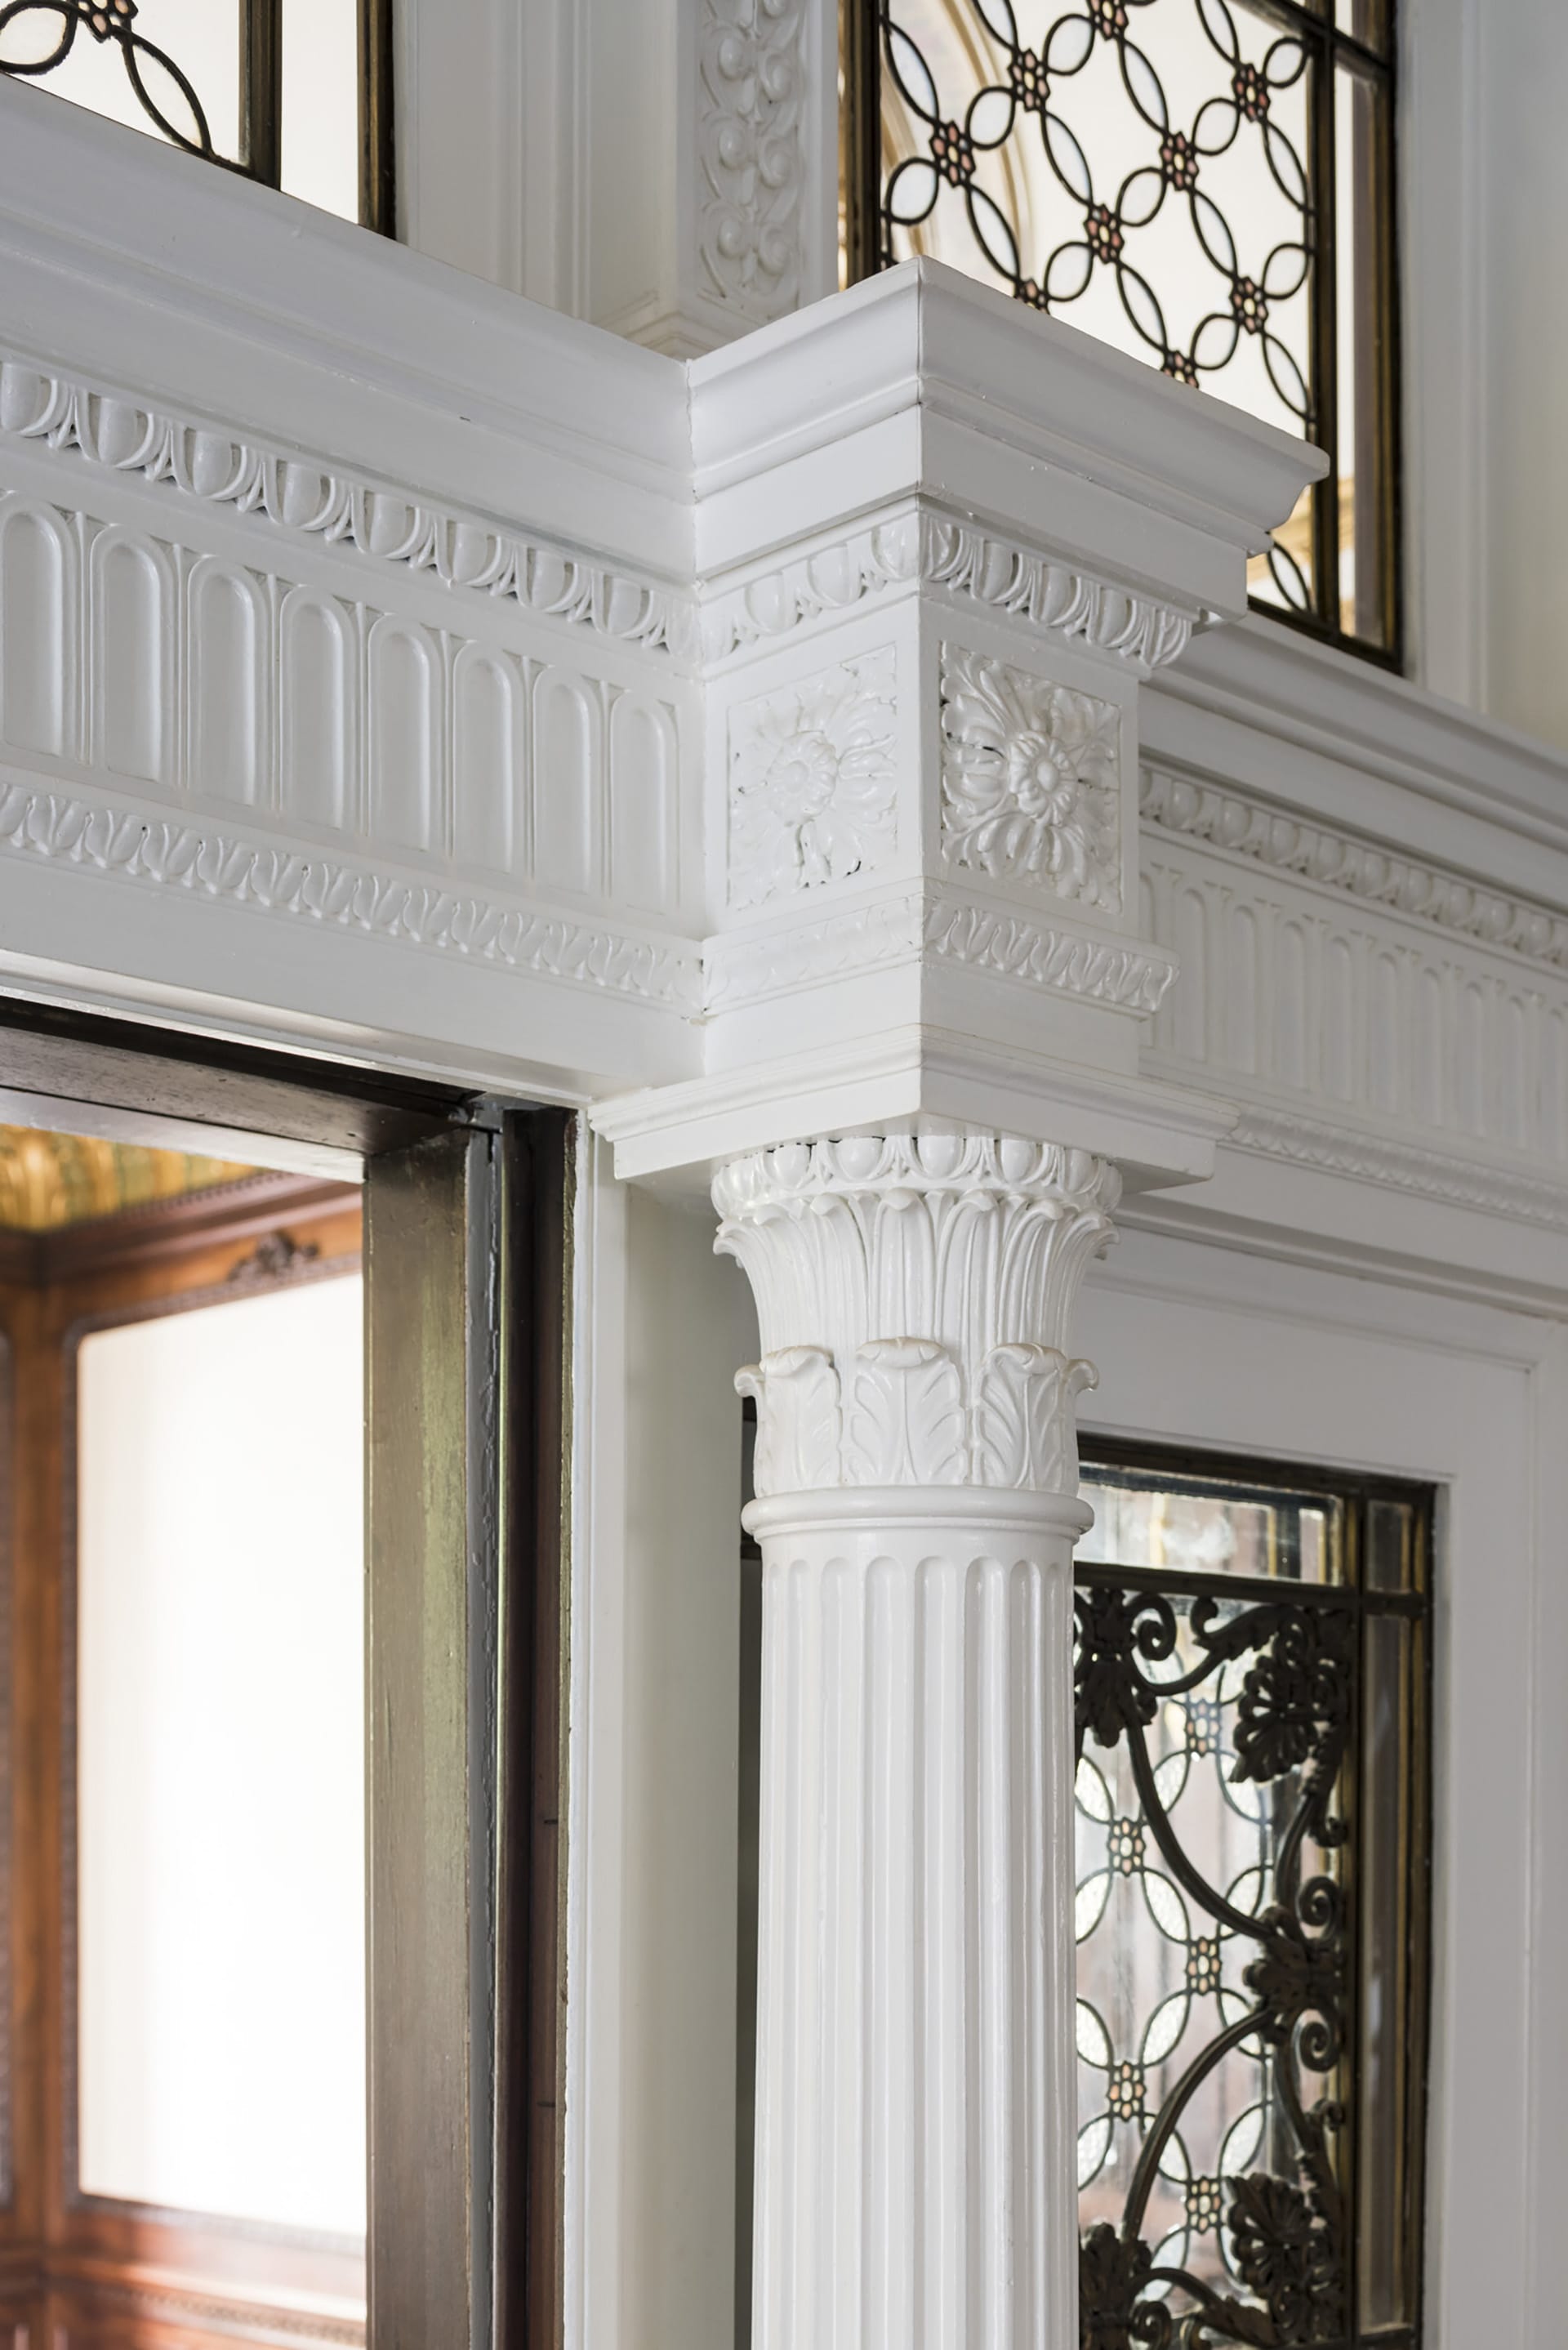 Detailed image of restored historic windows and molding in an Upper West Side mansion